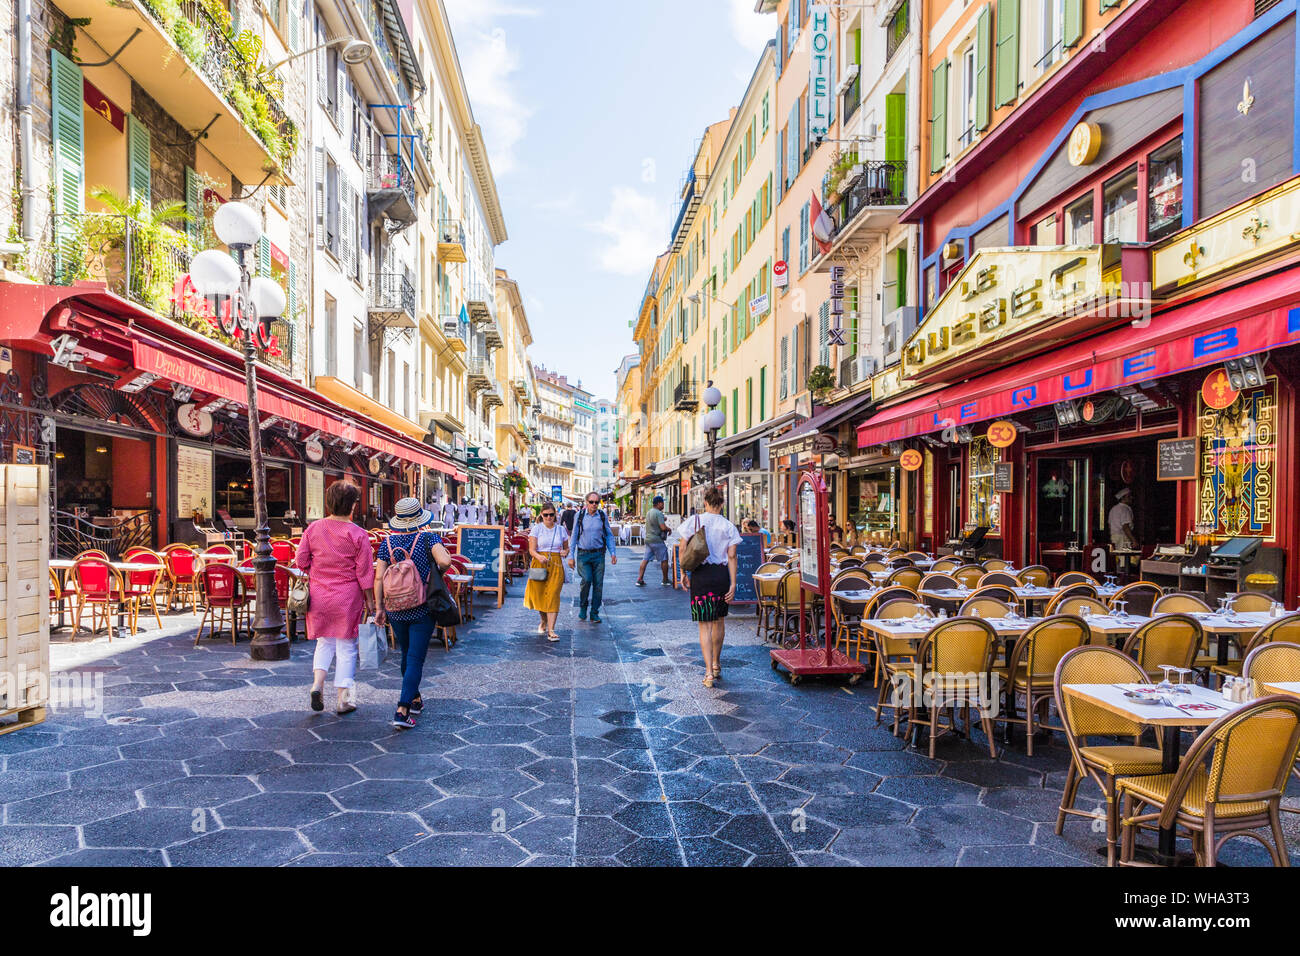 A street scene in Nice, Alpes Maritimes, Cote d'Azur, French Riviera, Provence, France, Mediterranean, Europe Stock Photo